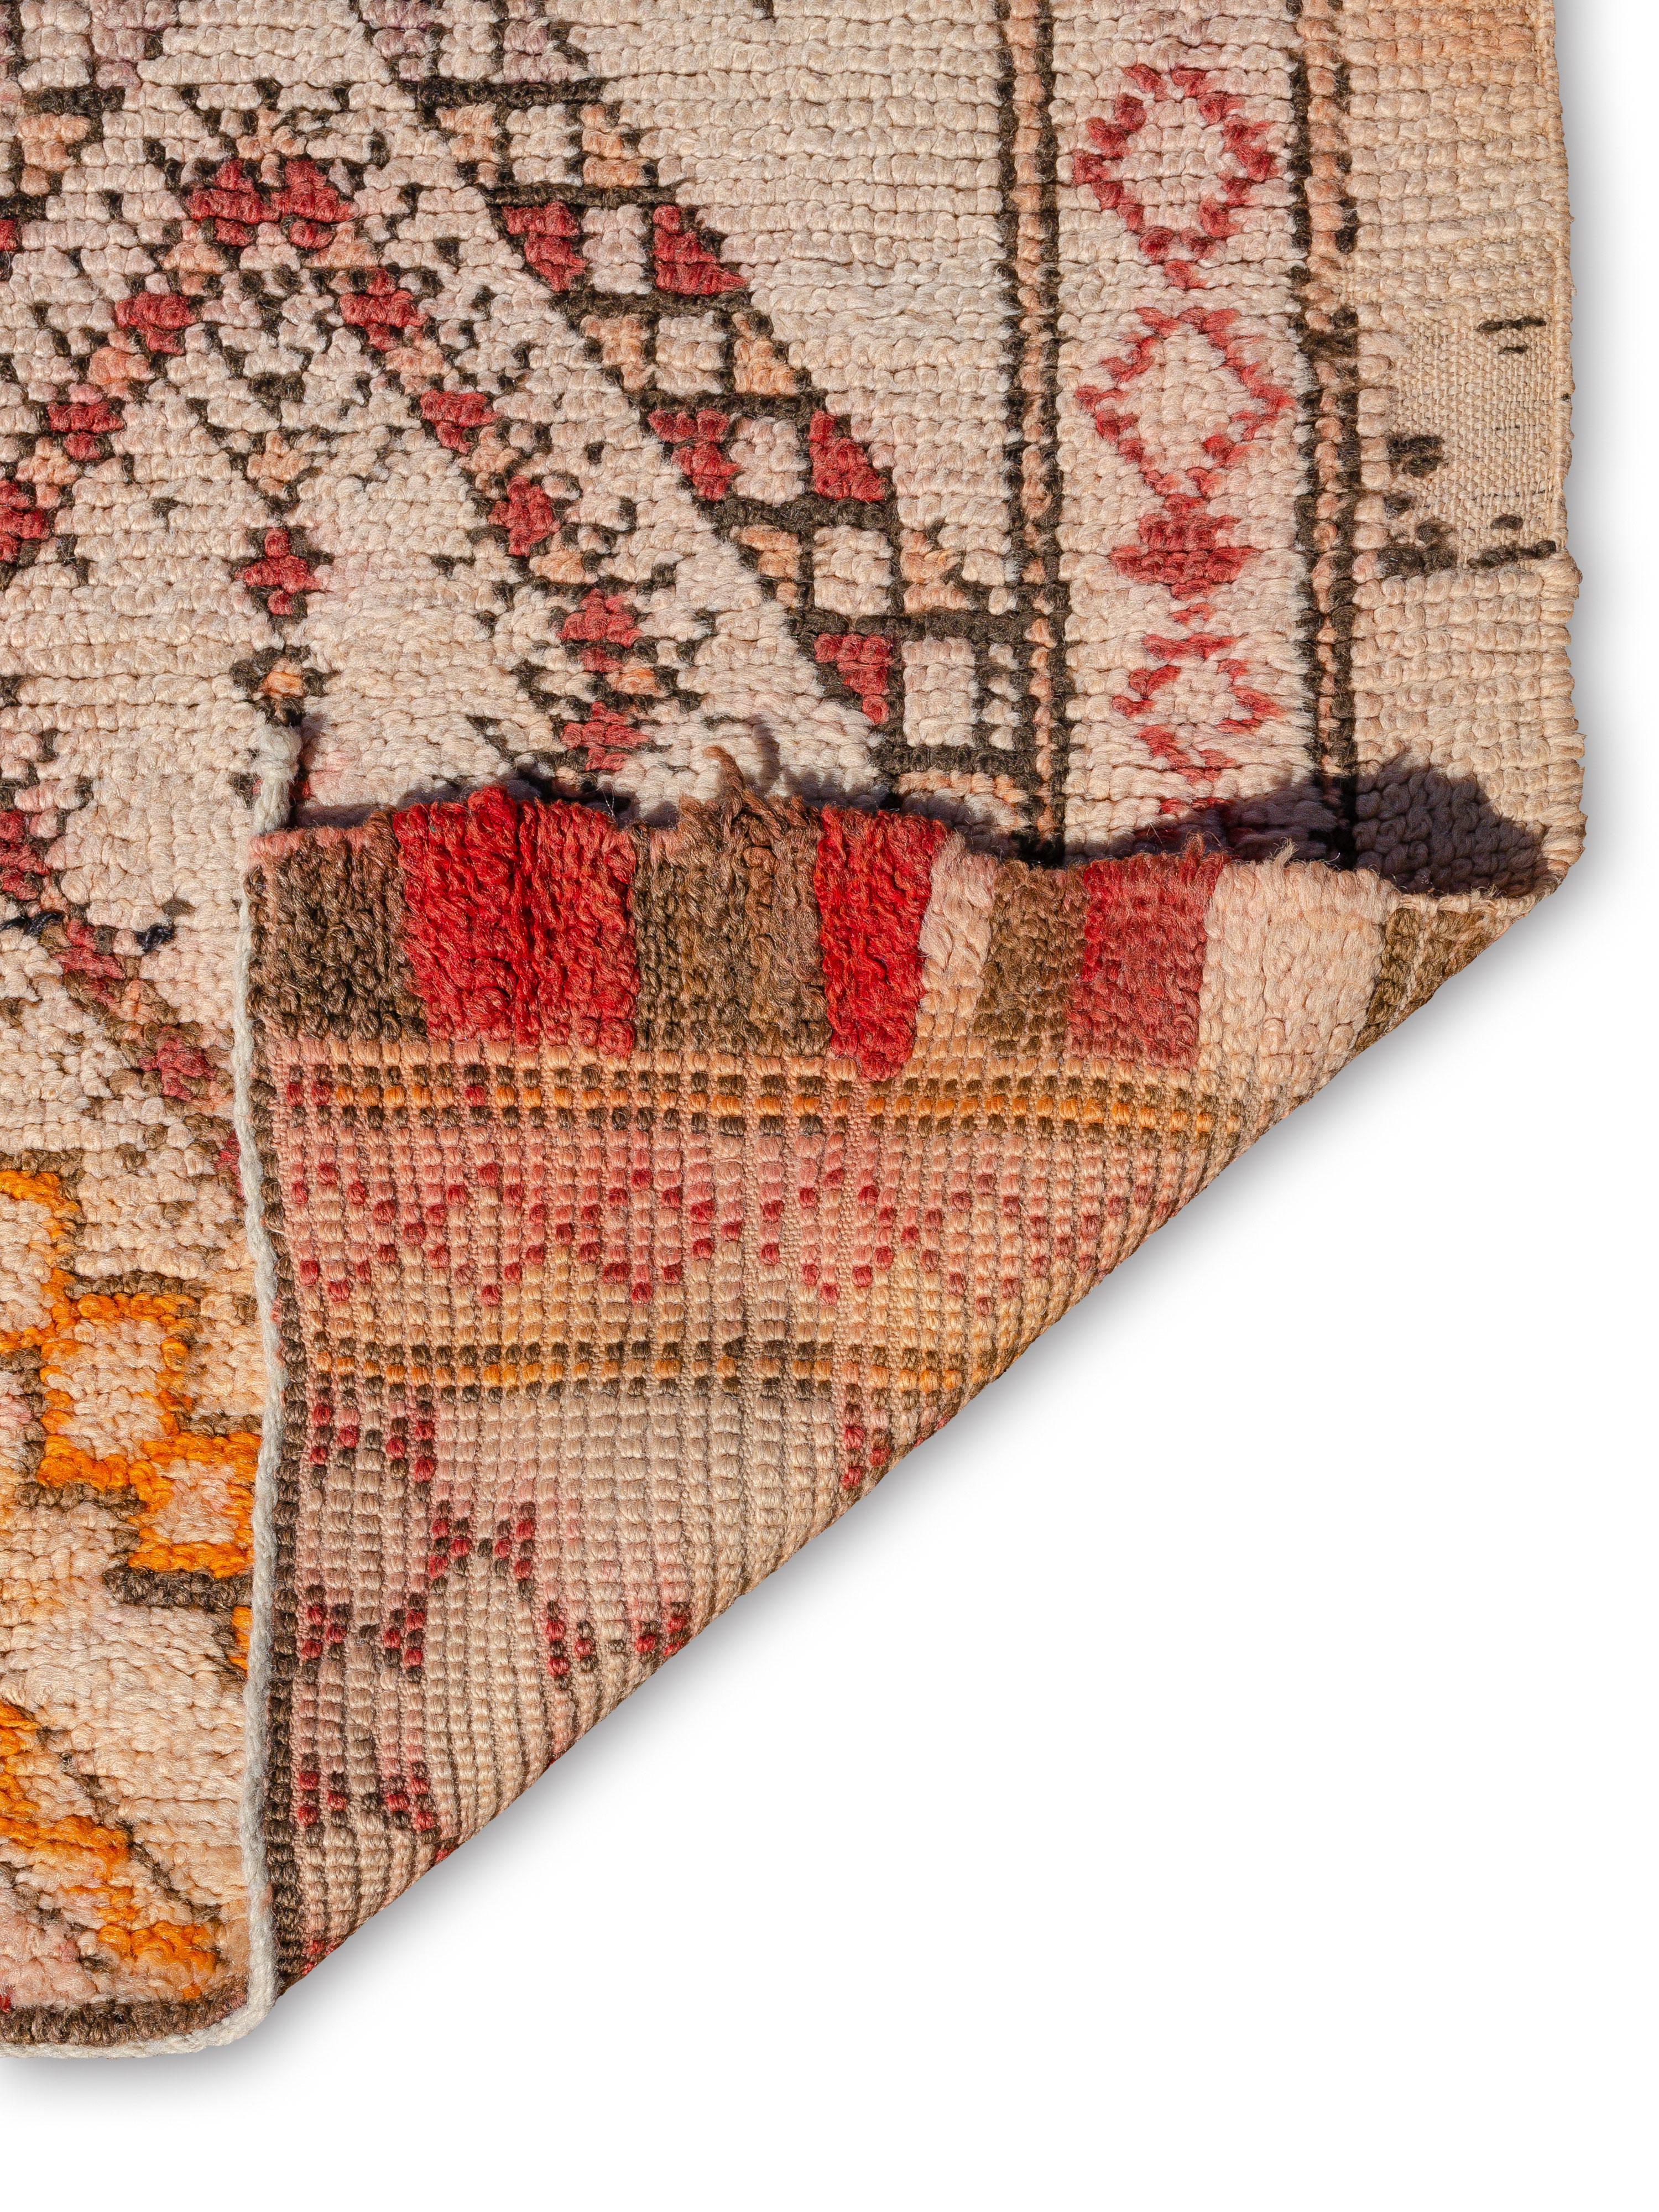 Hand-Woven Vintage classic Beni Ouarain Moroccan Berber Carpet curated by Breuckelen Berber For Sale